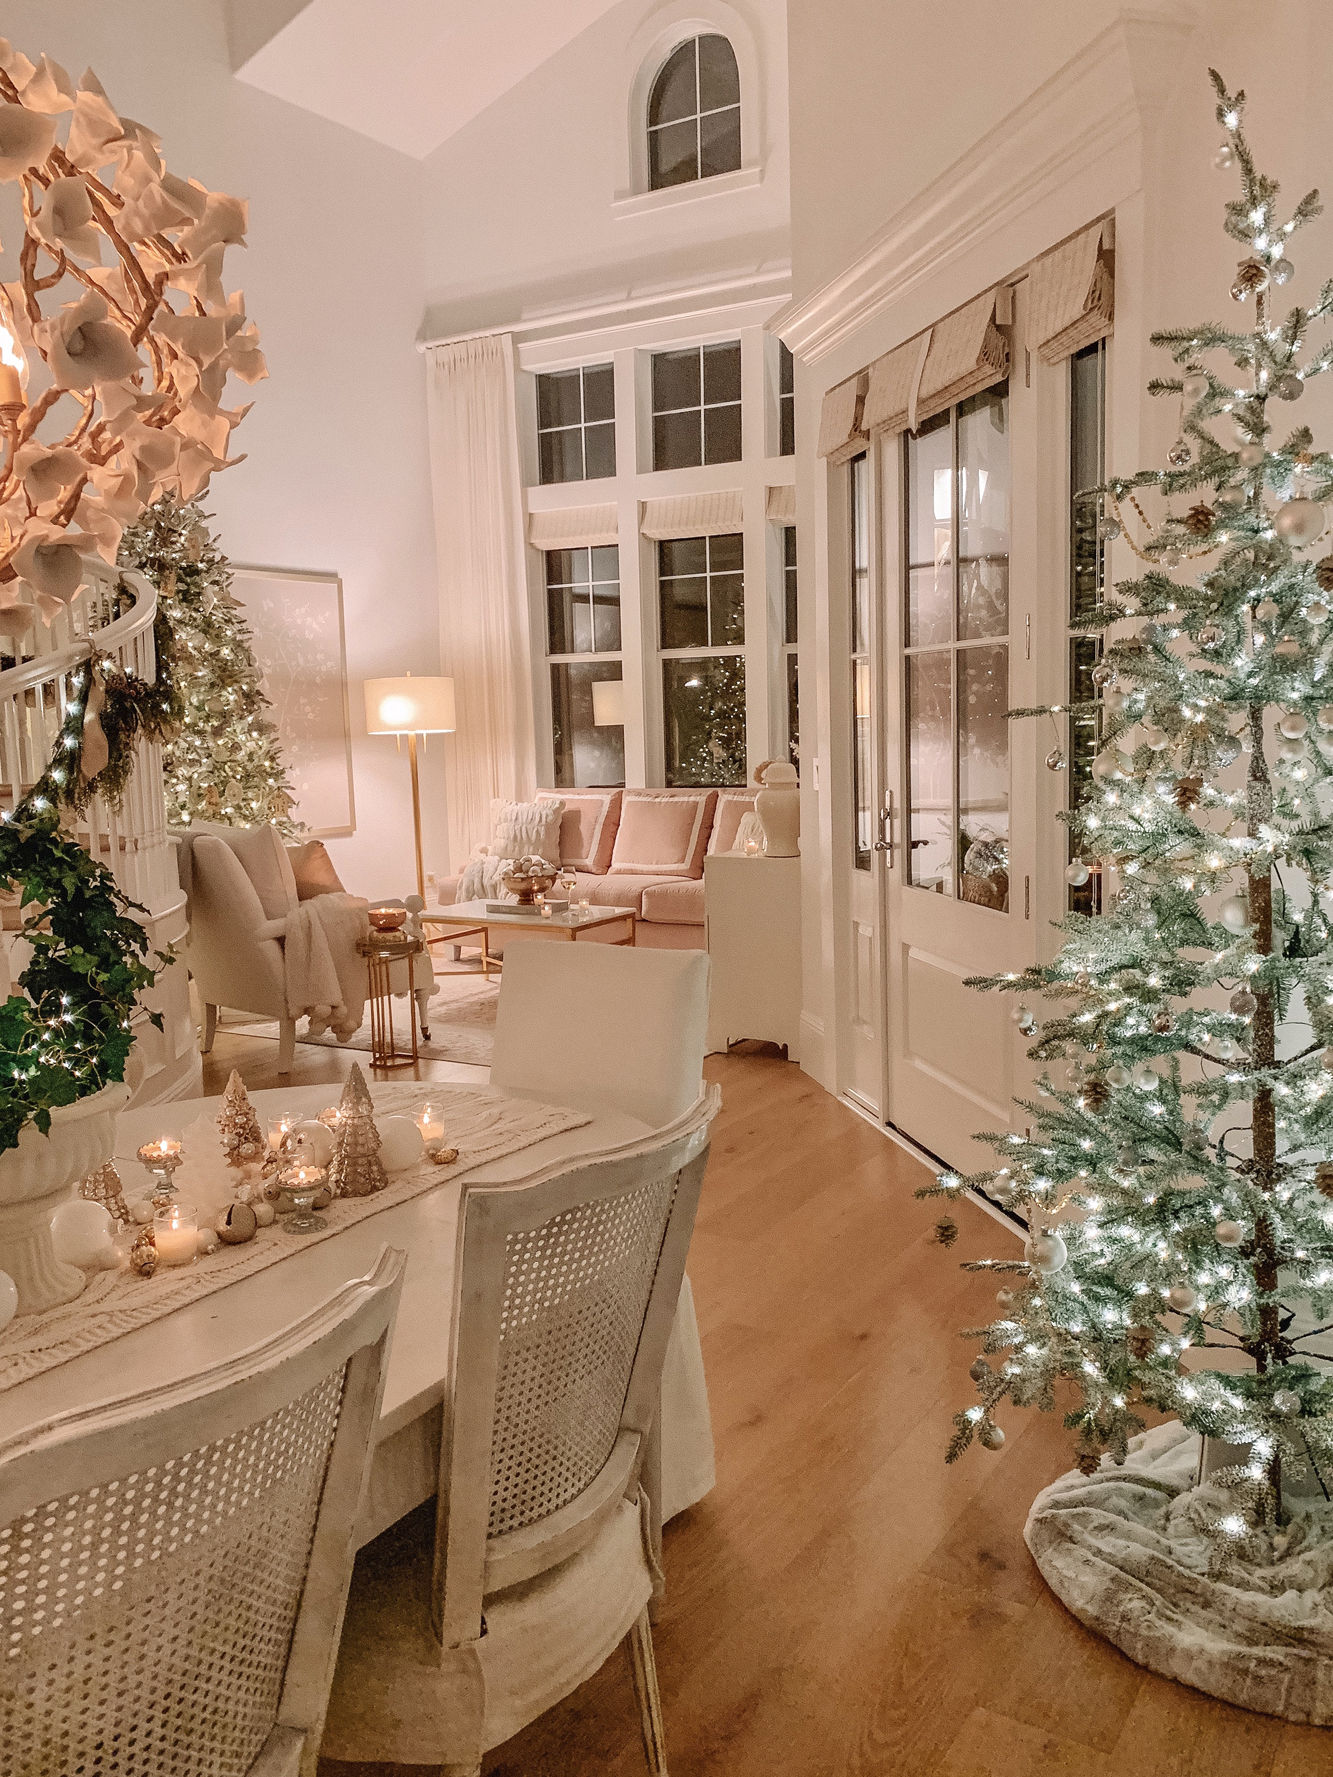 Holiday Decor Links & Sources - You all loved my Christmas decor from last year.. all of the hottest items are back in stock! Many on sale. Linked all.